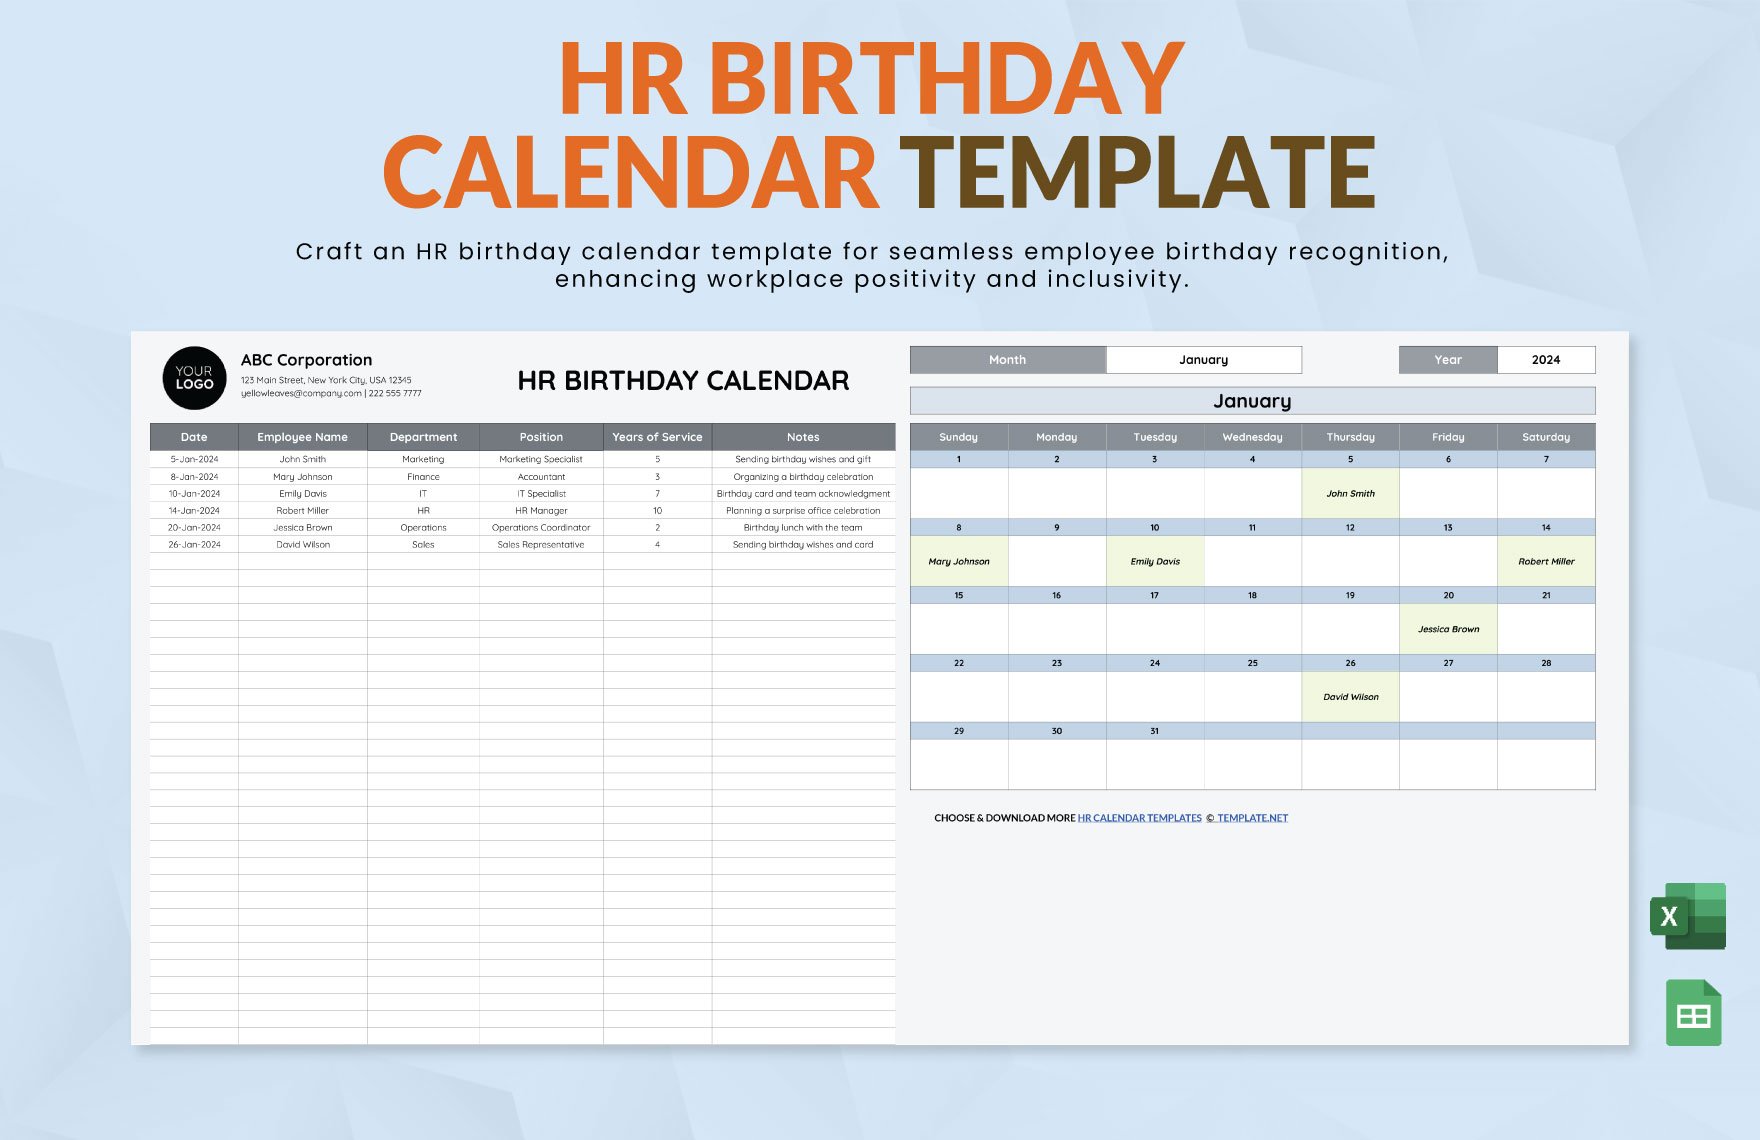 Free HR Birthday Calendar Template in Excel, Google Sheets